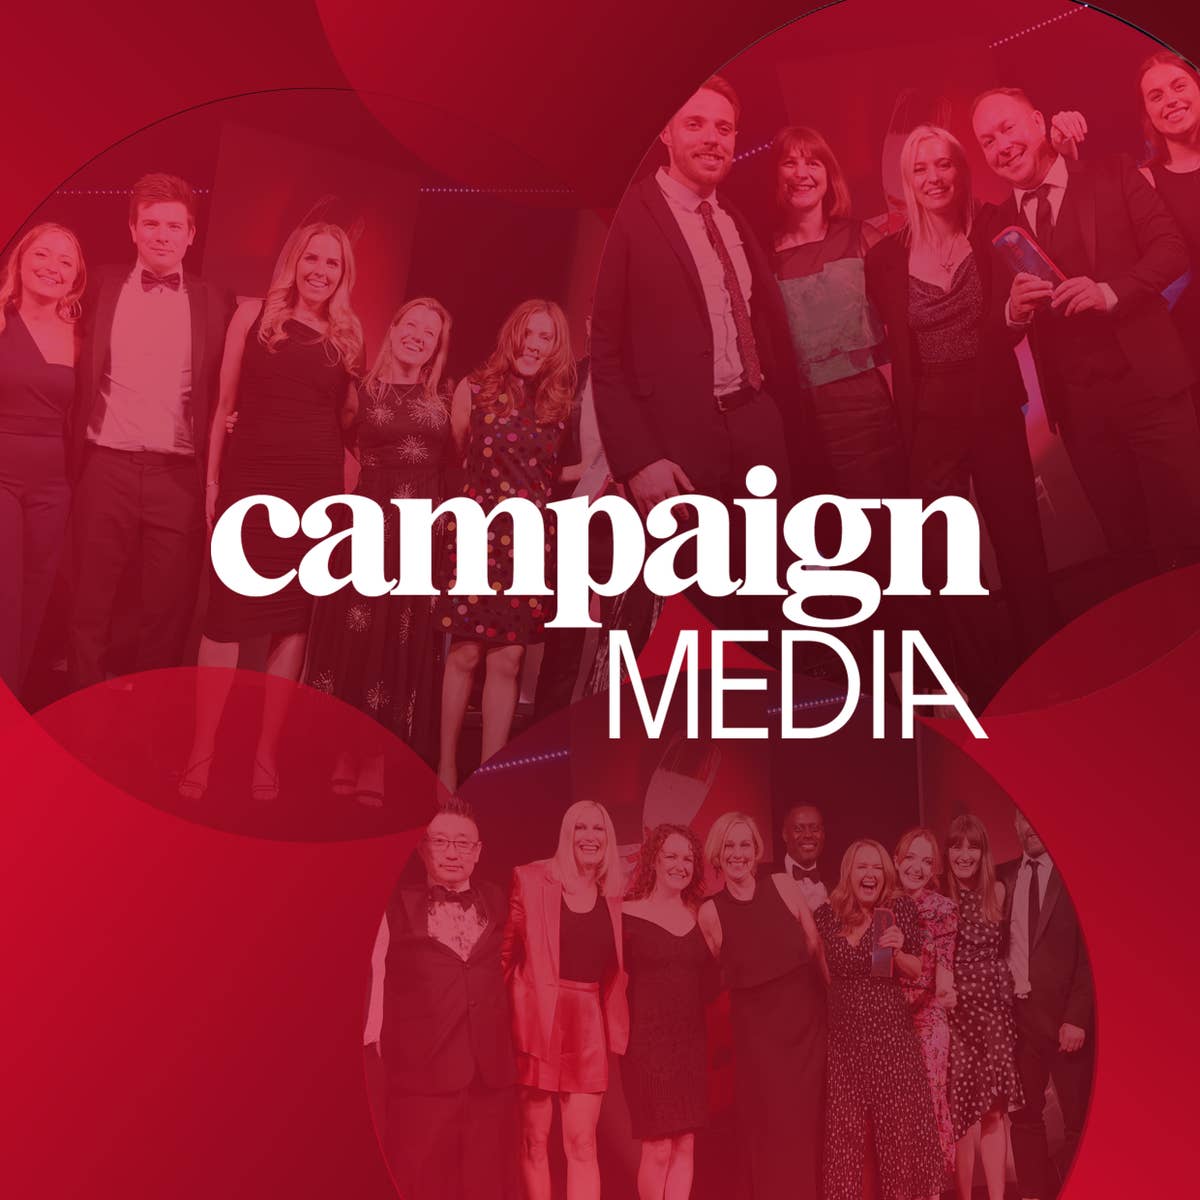 Three was our magic number at the Campaign Media Awards